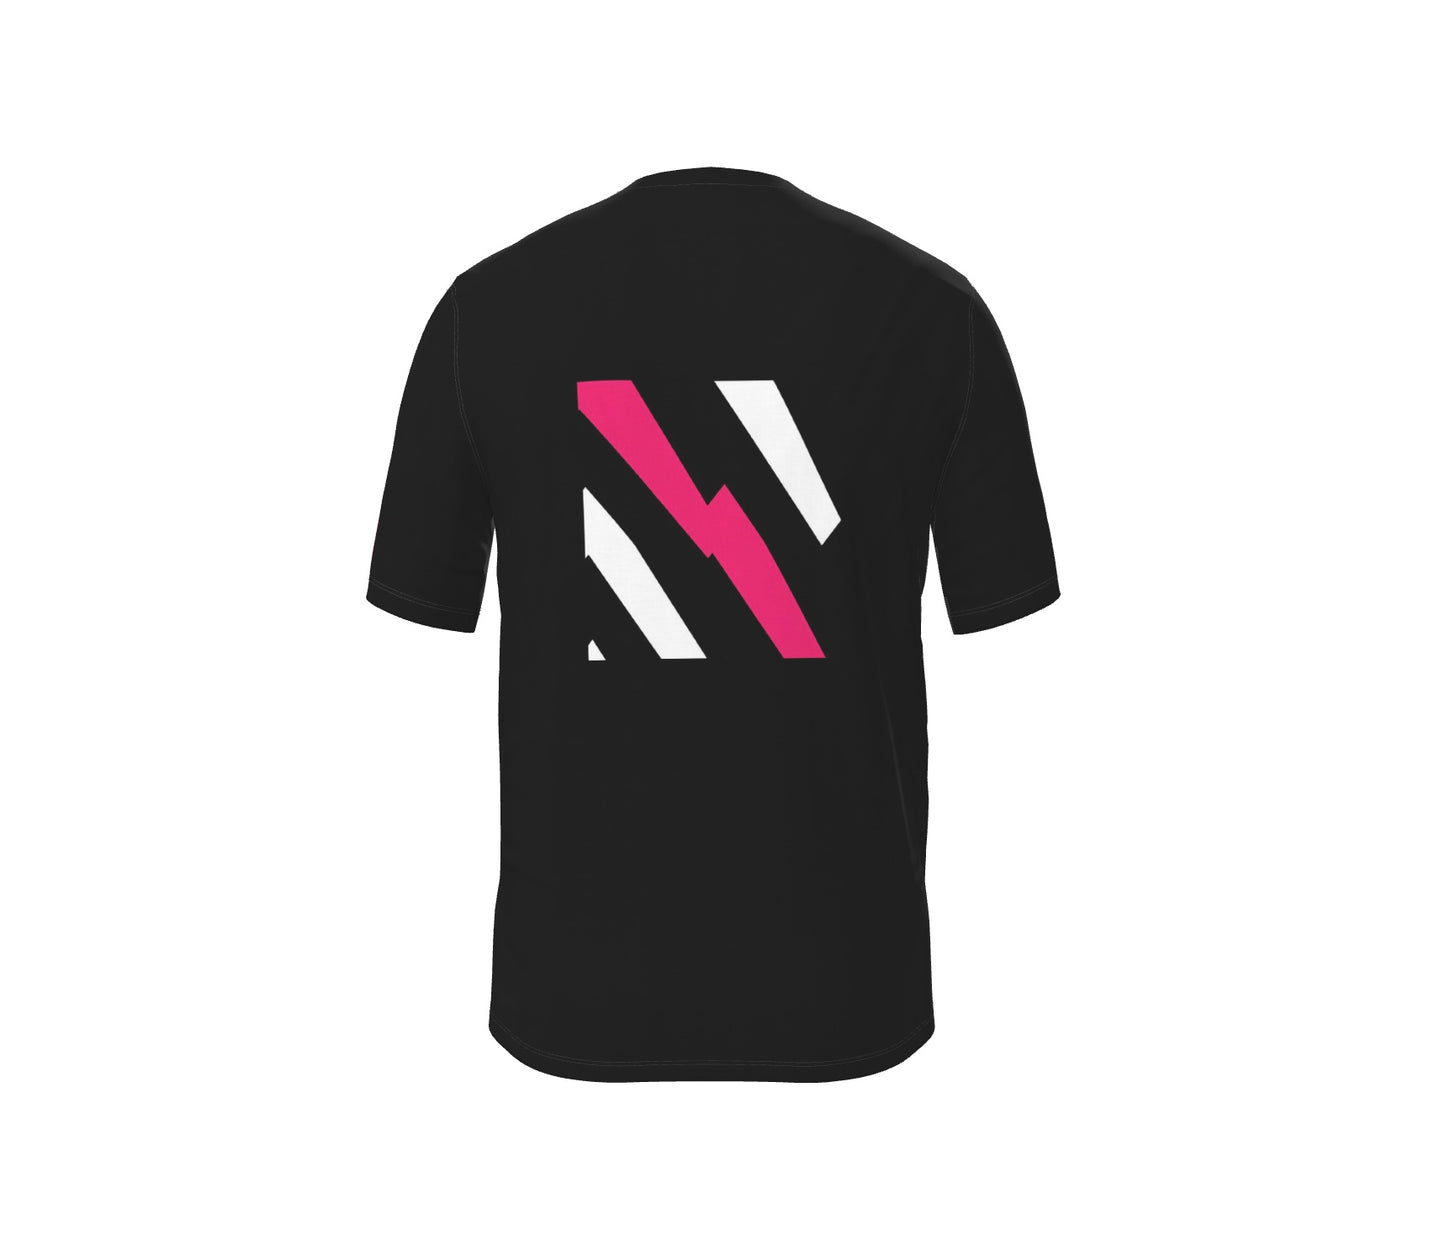 Sustain GT Racer T-Shirt - Pink Bolt on Black Limited Edition